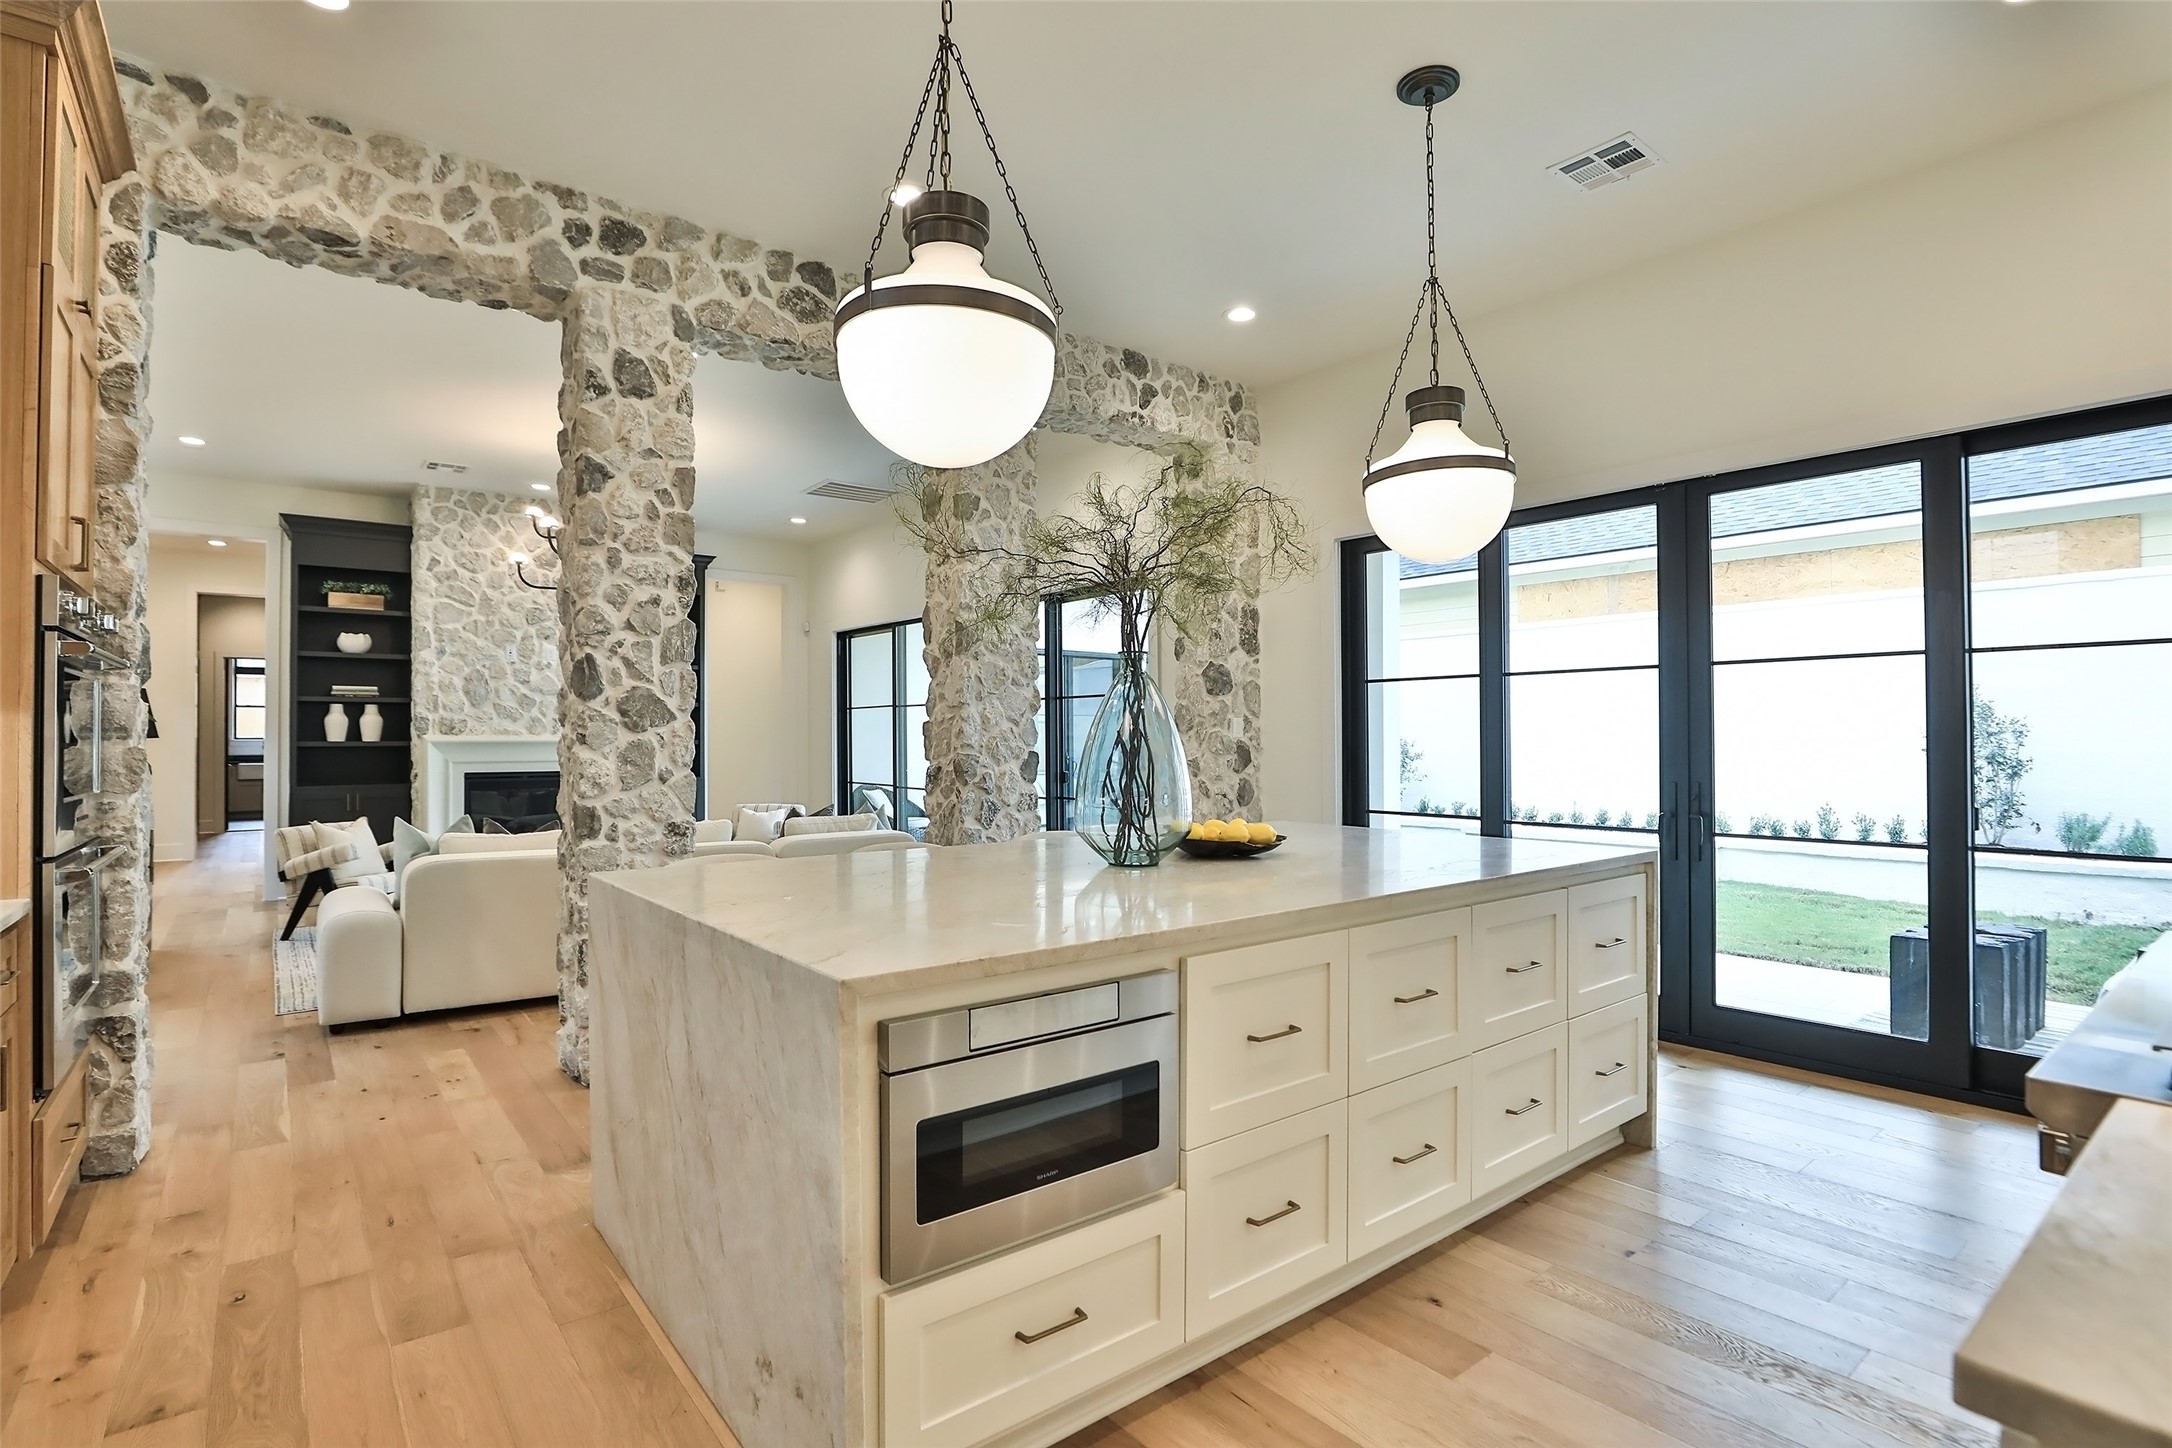 Two elegant designer pendant lights complement the island. The gas range is a Fisher Paykel with 6 burners and a griddle plus a pot filler and custom vent hood.